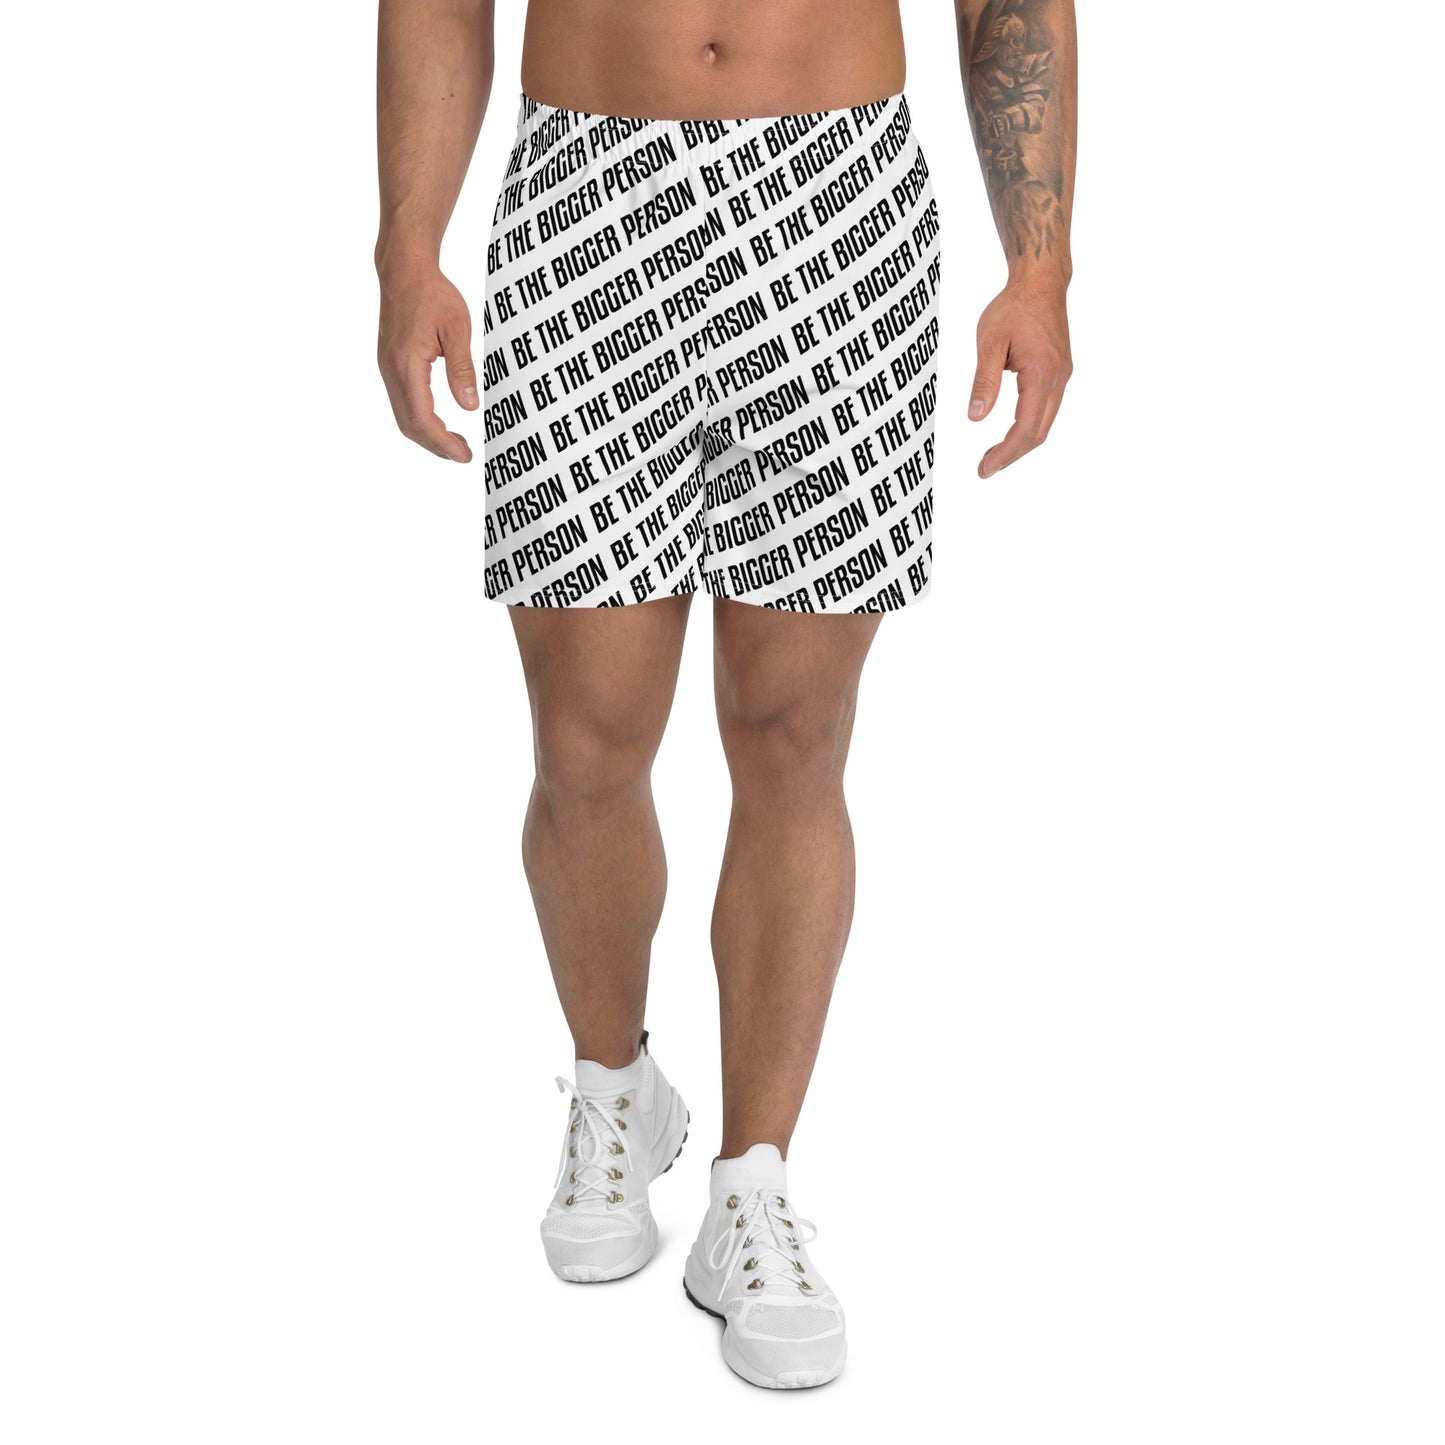 LOCKED UP - Men's Recycled Athletic Shorts